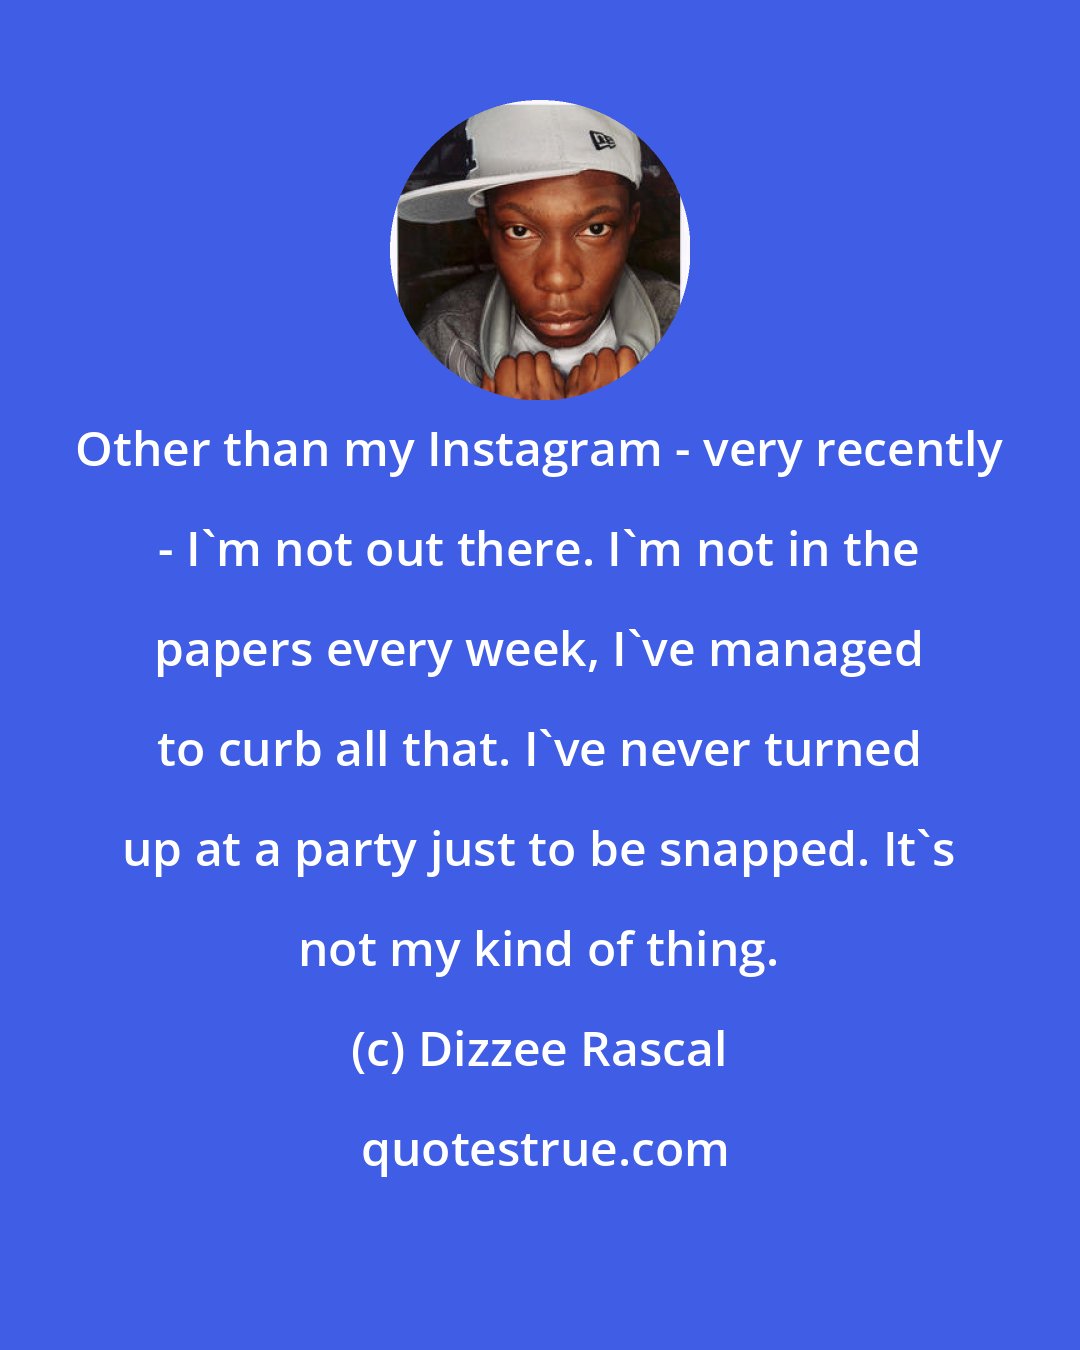 Dizzee Rascal: Other than my Instagram - very recently - I'm not out there. I'm not in the papers every week, I've managed to curb all that. I've never turned up at a party just to be snapped. It's not my kind of thing.